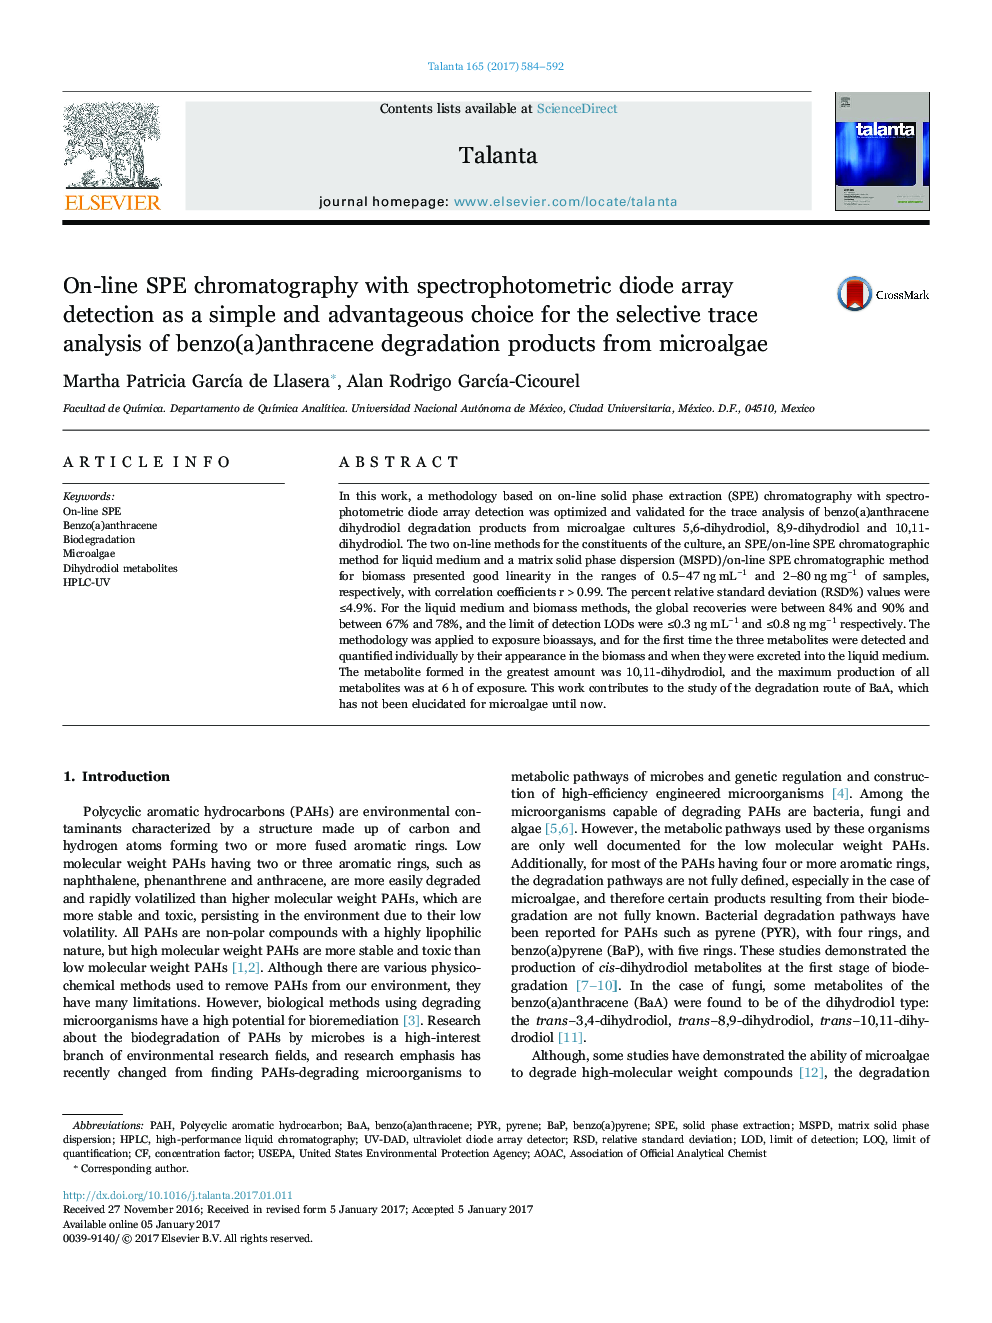 On-line SPE chromatography with spectrophotometric diode array detection as a simple and advantageous choice for the selective trace analysis of benzo(a)anthracene degradation products from microalgae